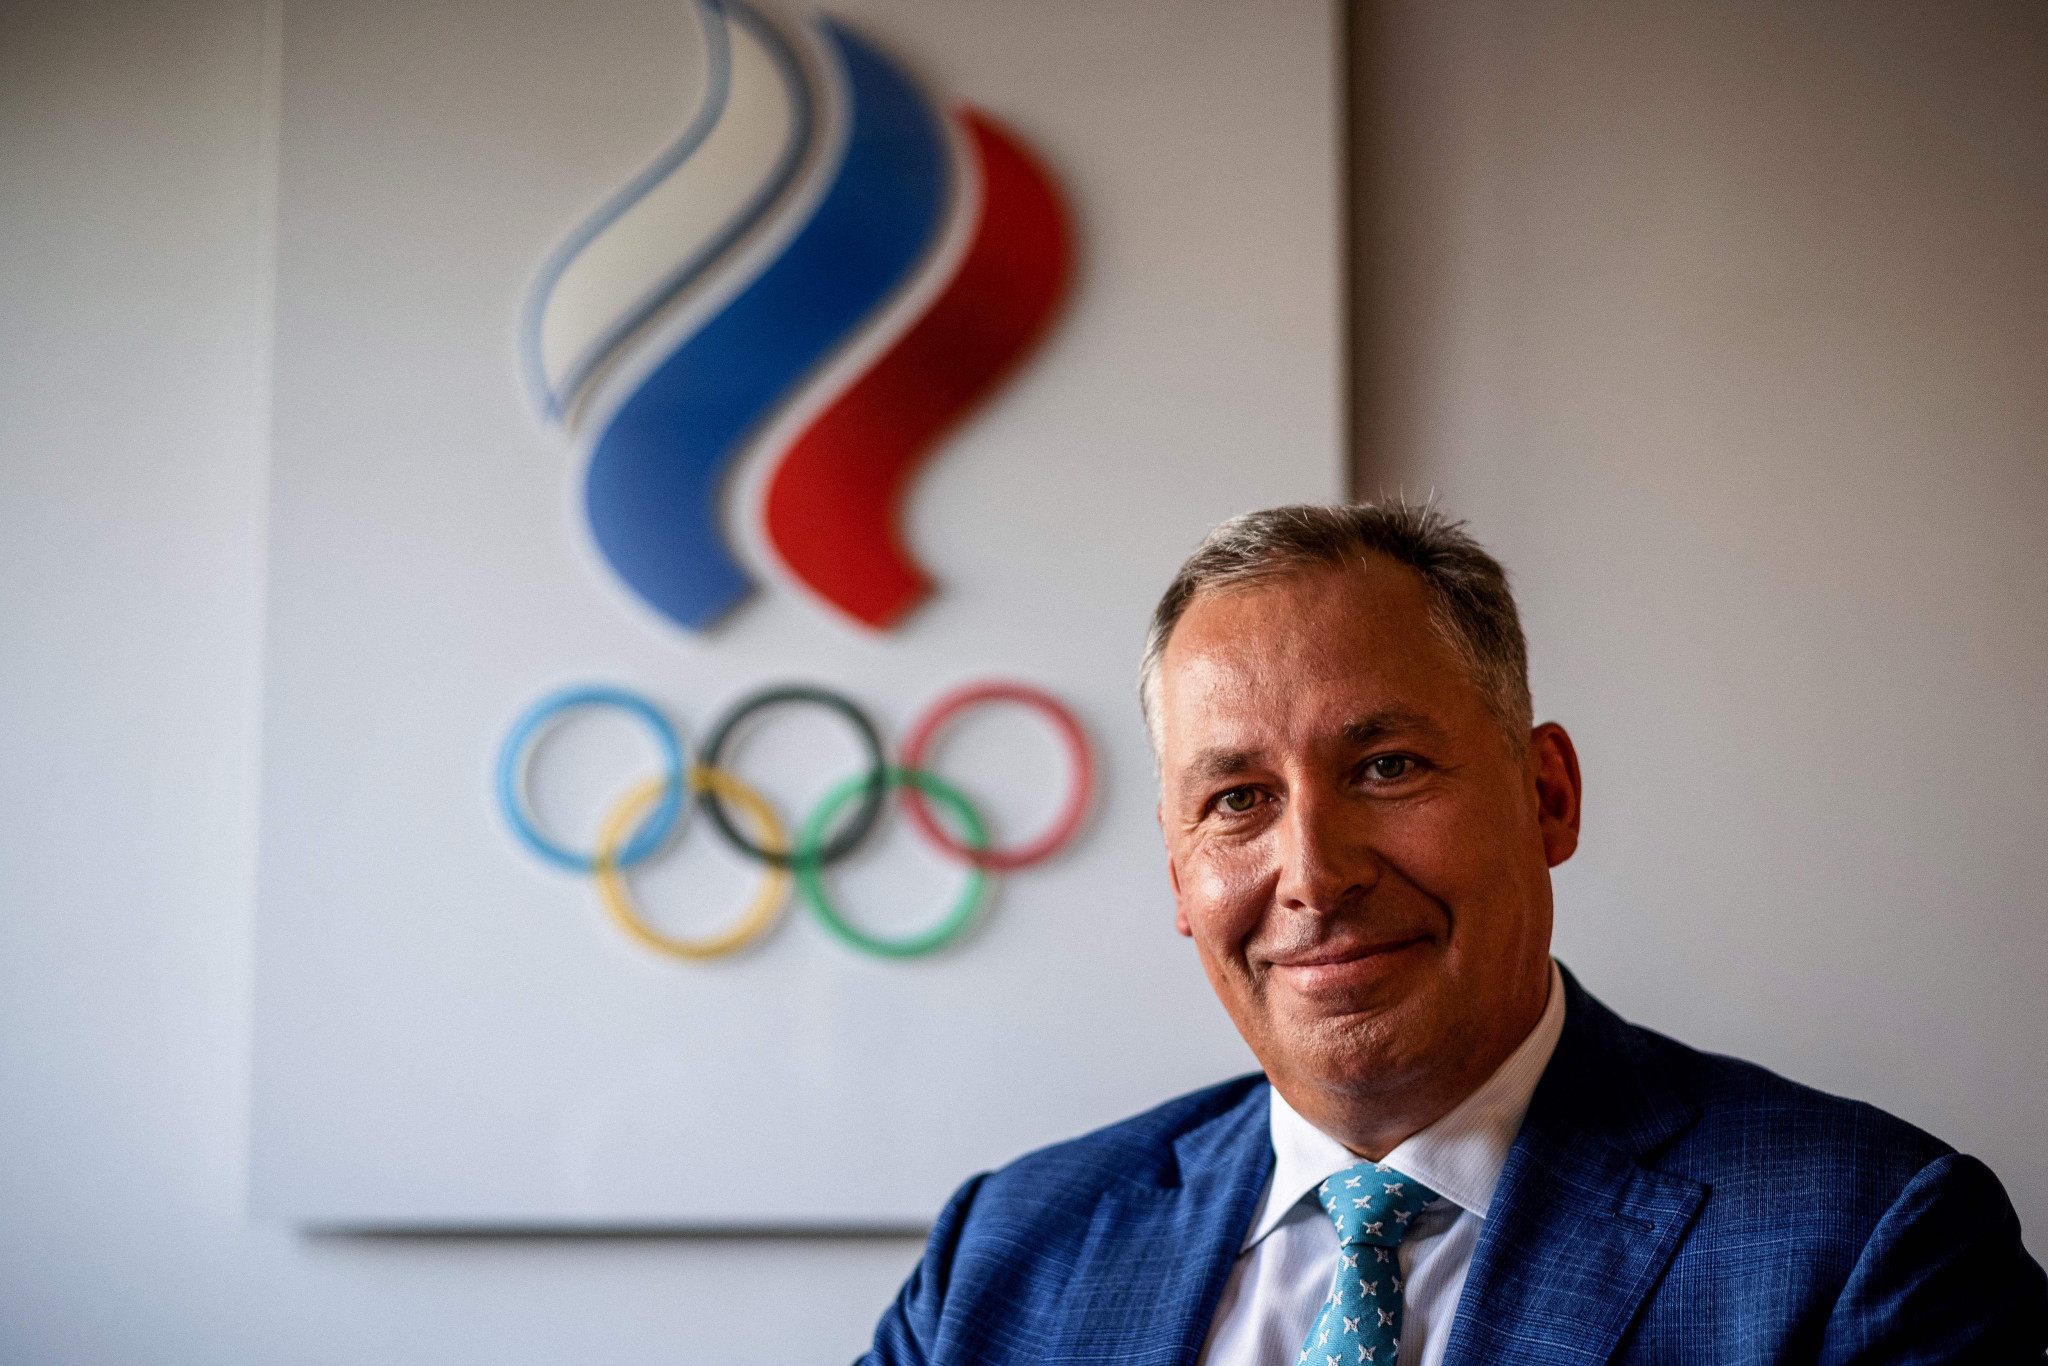 Pozdynakov, re-elected as ROC President, looks at "alternative" Olympic options